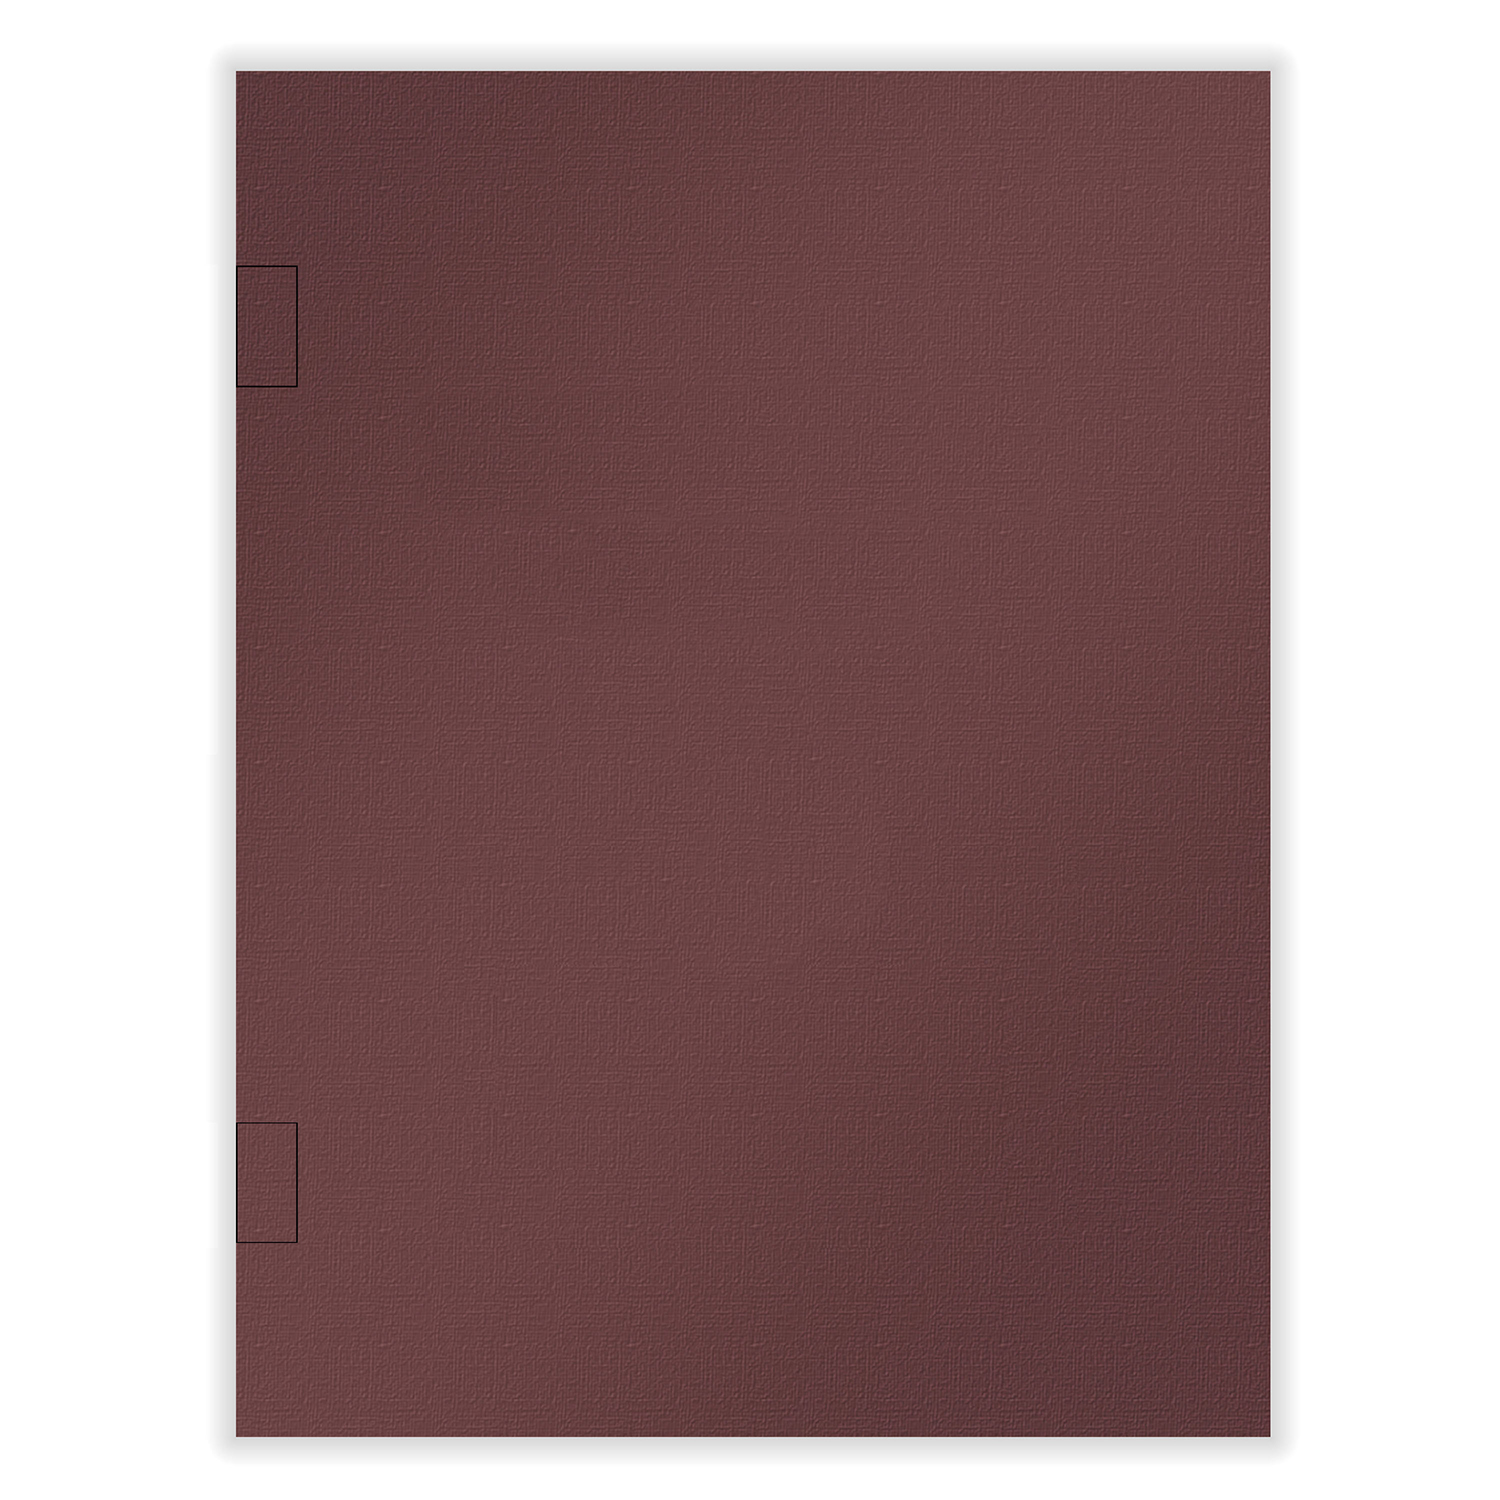 Picture of Tax Presentation Folder, Report Cover, Spine, Side-Staple Tabs, Burgundy, 8-5/8" x 11-1/4", Pack of 50